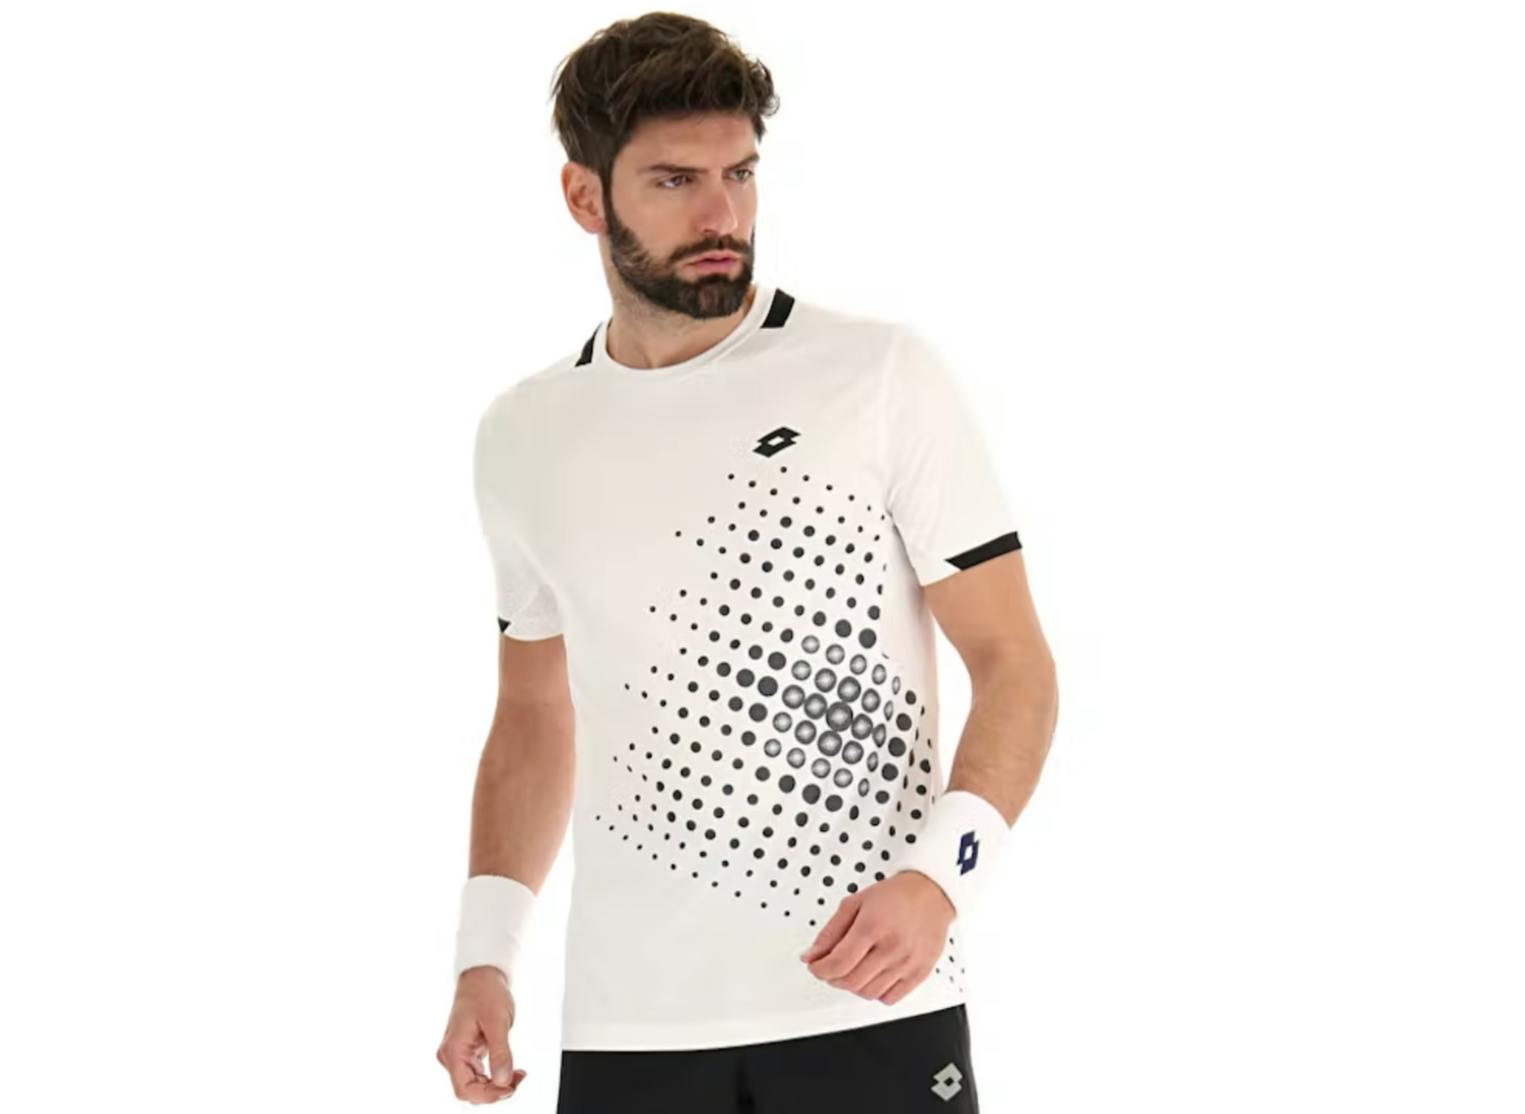 A man wearing the Lotto Men’s Top IV 1 Shirt in the color Bright White.